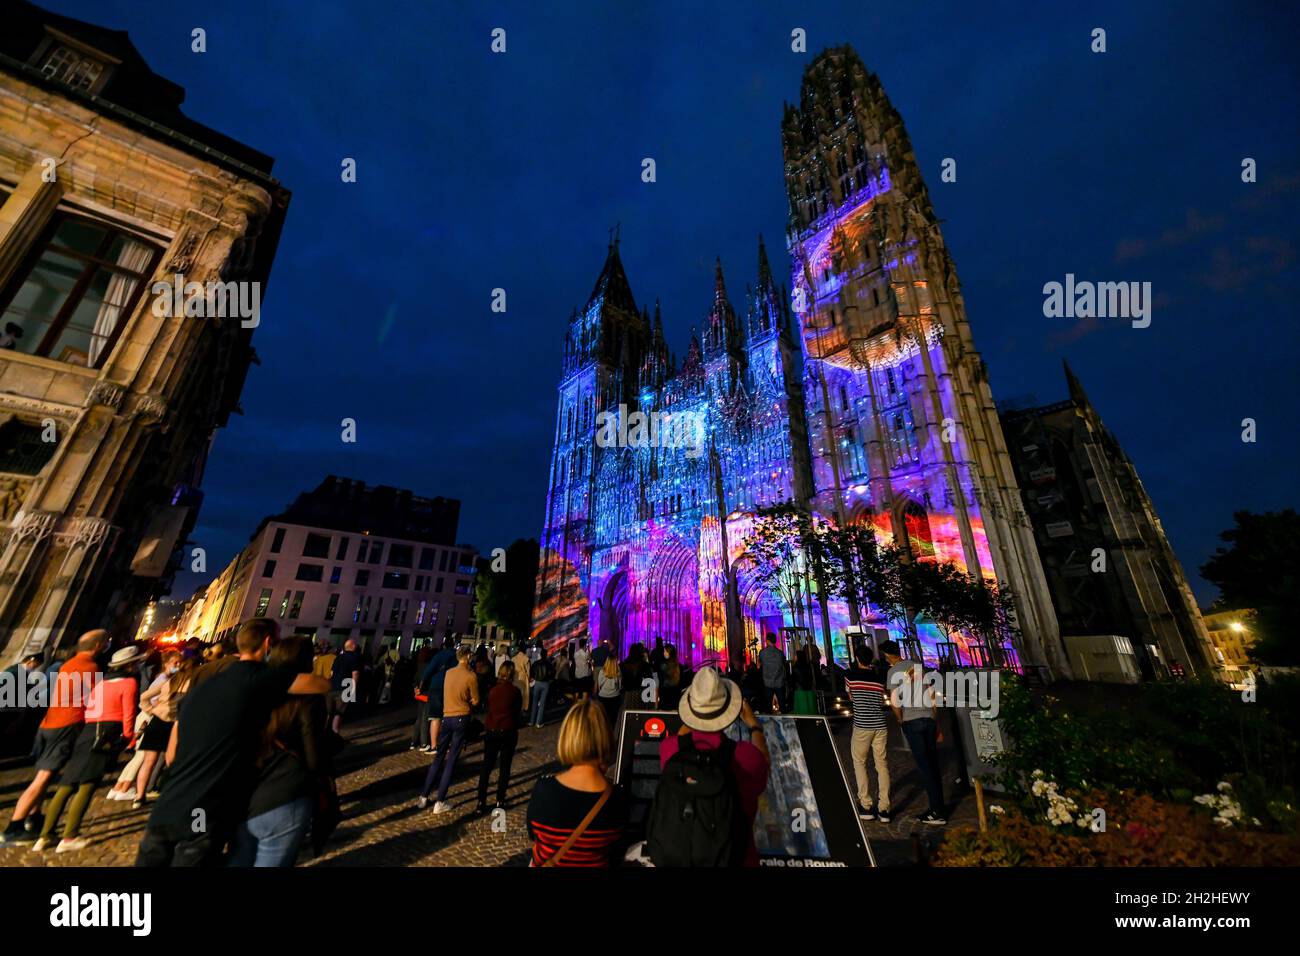 Rouen (Normandy, northern France): Rouen’s Cathedral Light Show (“Cathedrale de lumiere 2021”) . Illuminations projected on the facade of the Catheral Stock Photo